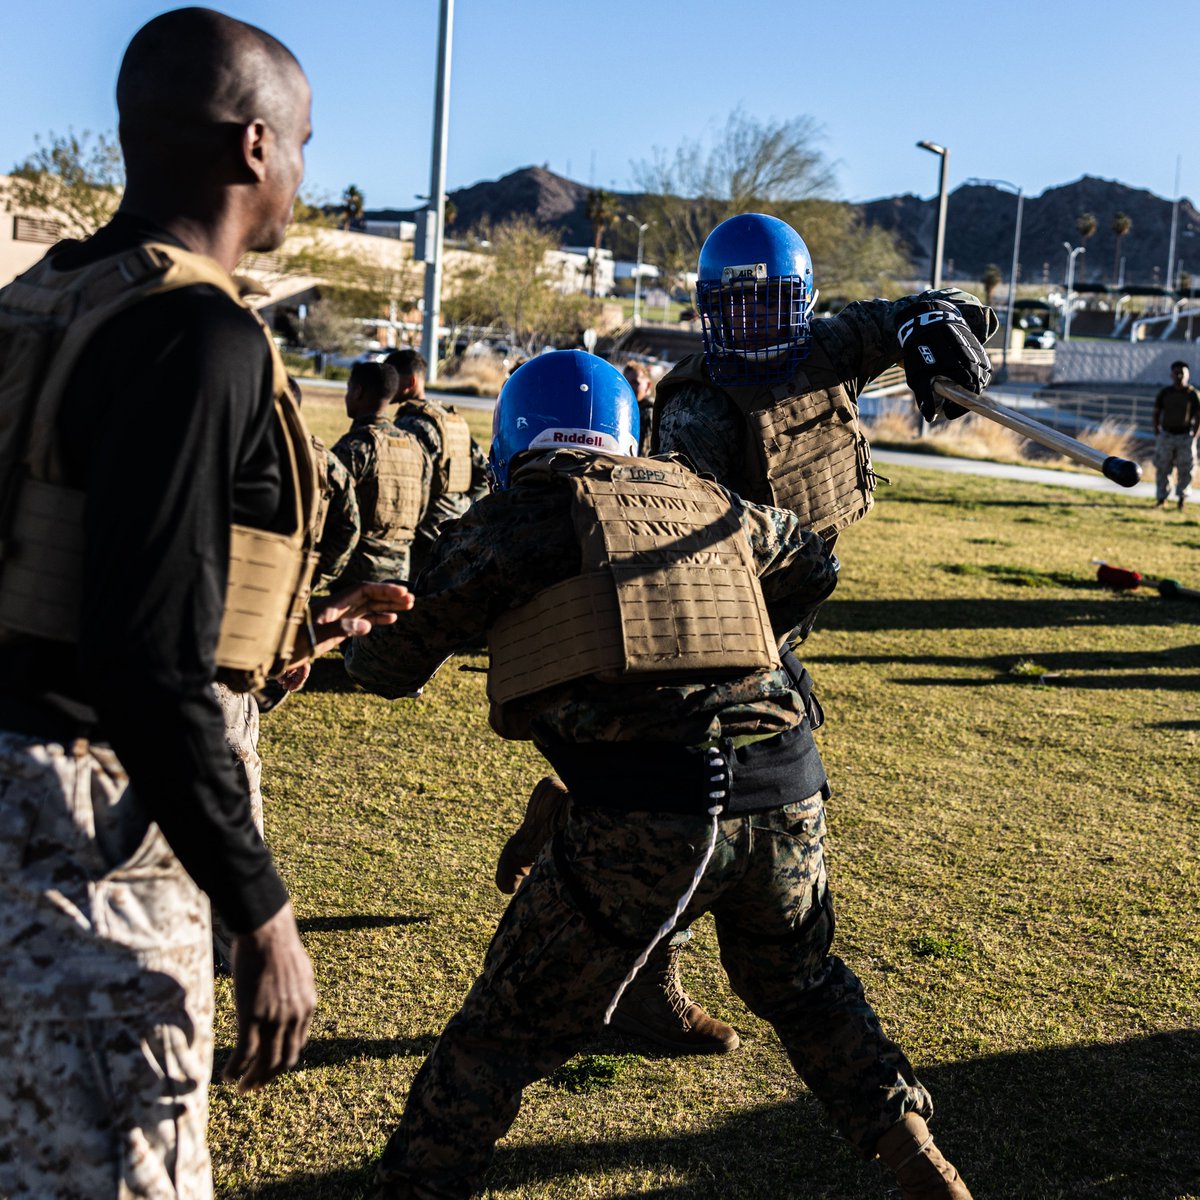 One Mind, Any Weapon Marines with Marine Corps Martial Arts Instructor Course 61-24 conduct their culminating training event at The Combat Center. | @USMC | 📸 LCpl Richard PerezGarcia